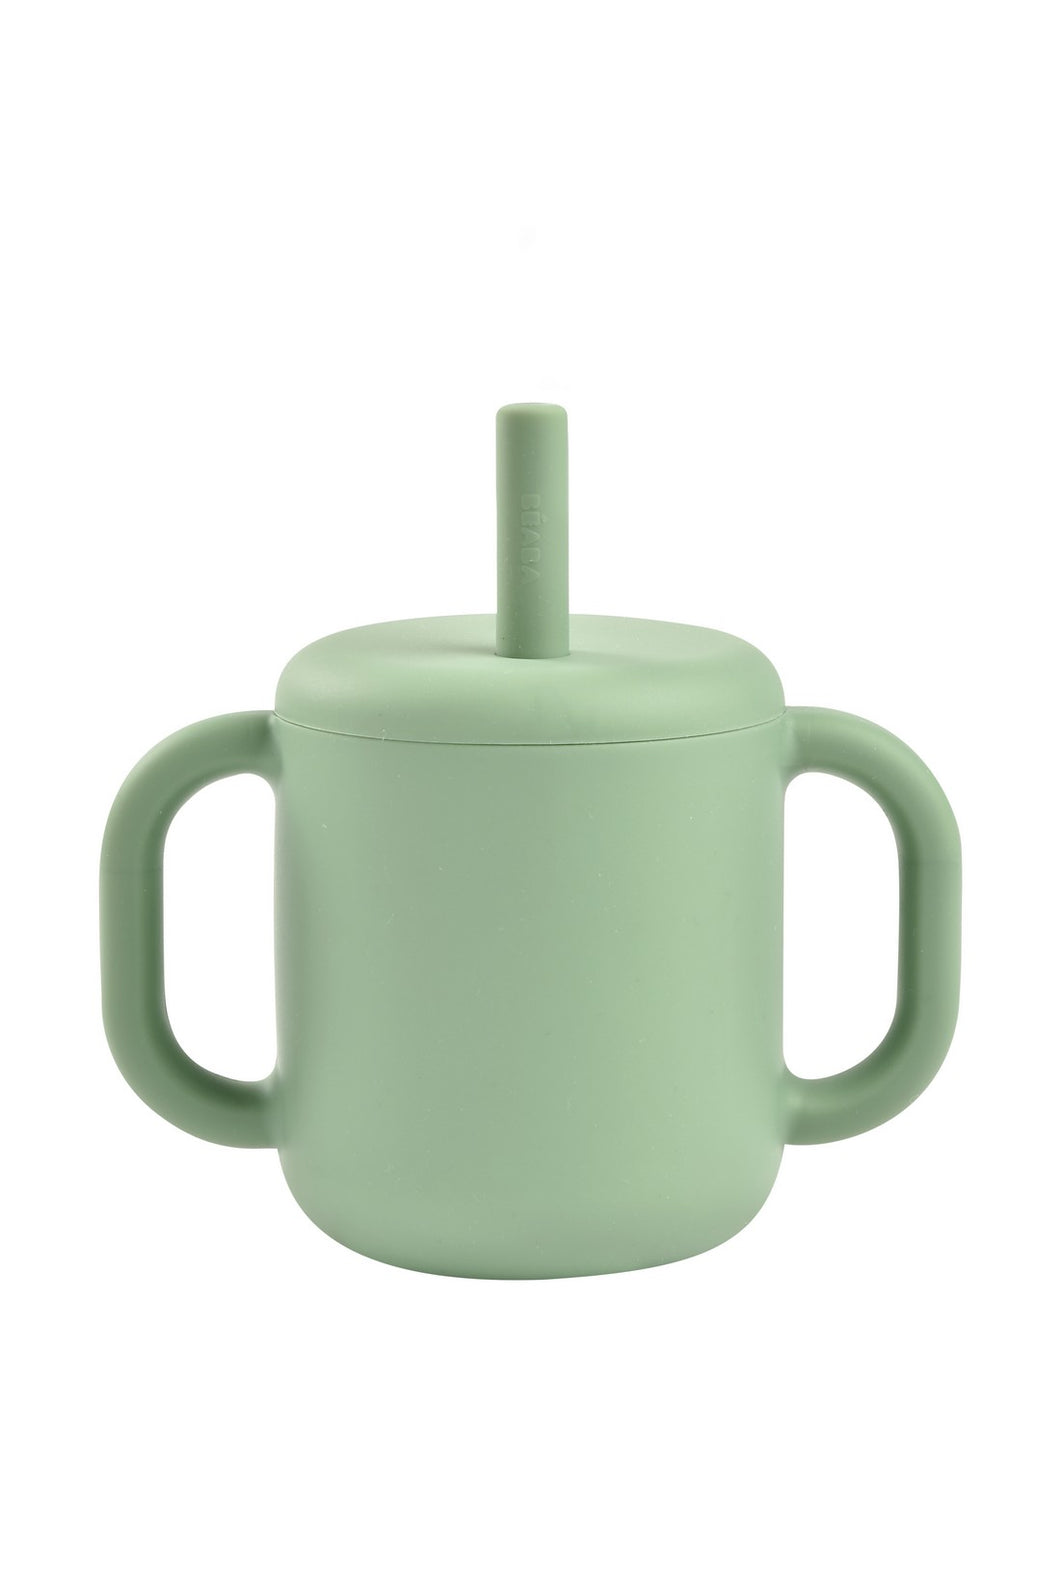 Beaba Silicone Straw Cup Sage Green 2